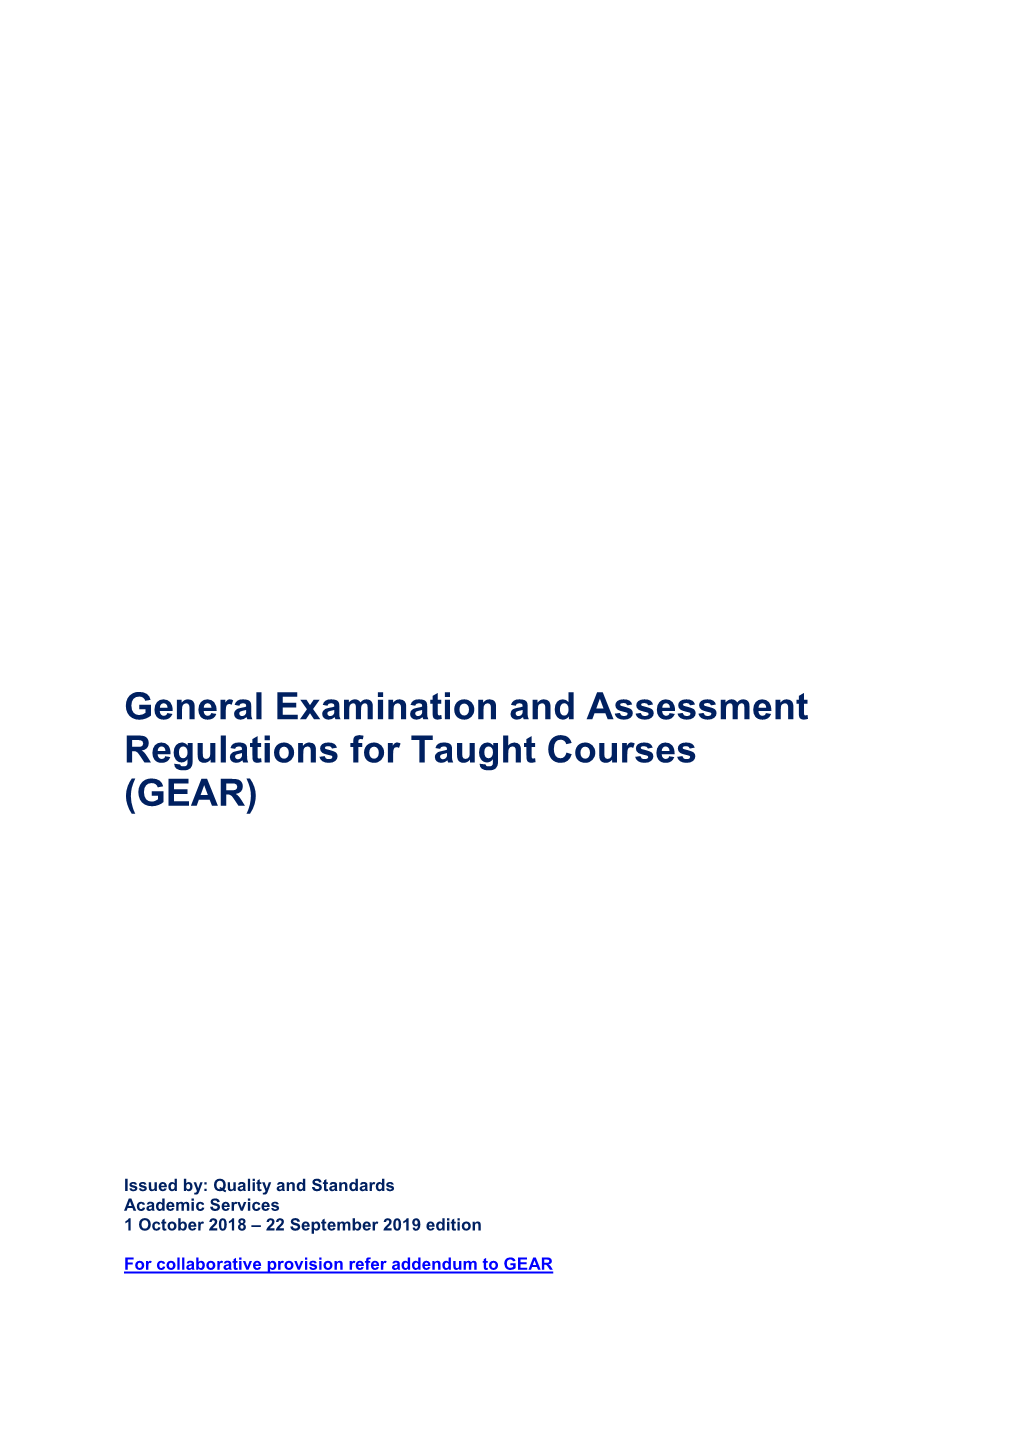 General Examination and Assessment Regulations for Taught Courses (GEAR)